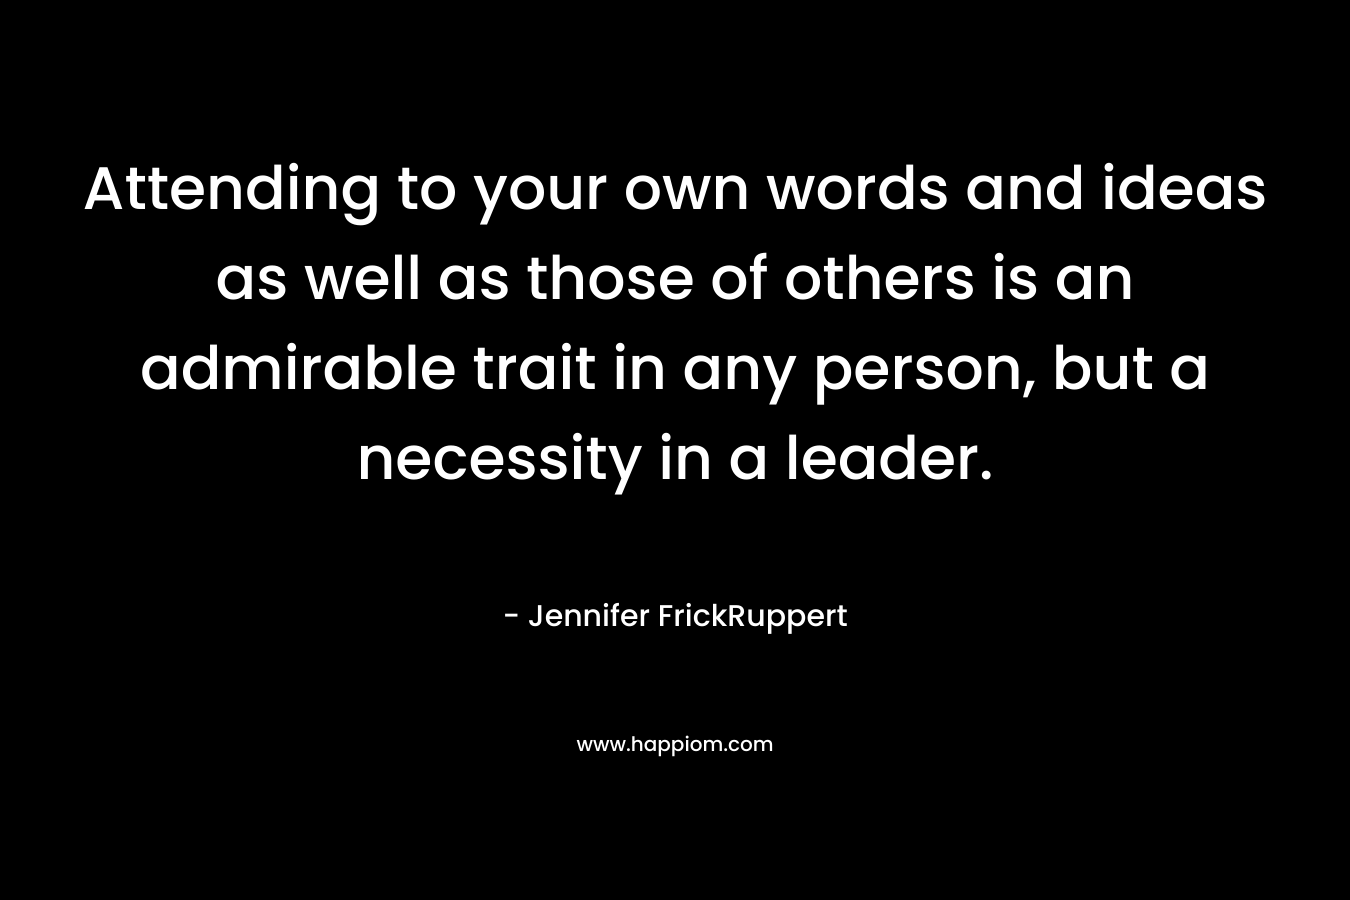 Attending to your own words and ideas as well as those of others is an admirable trait in any person, but a necessity in a leader.